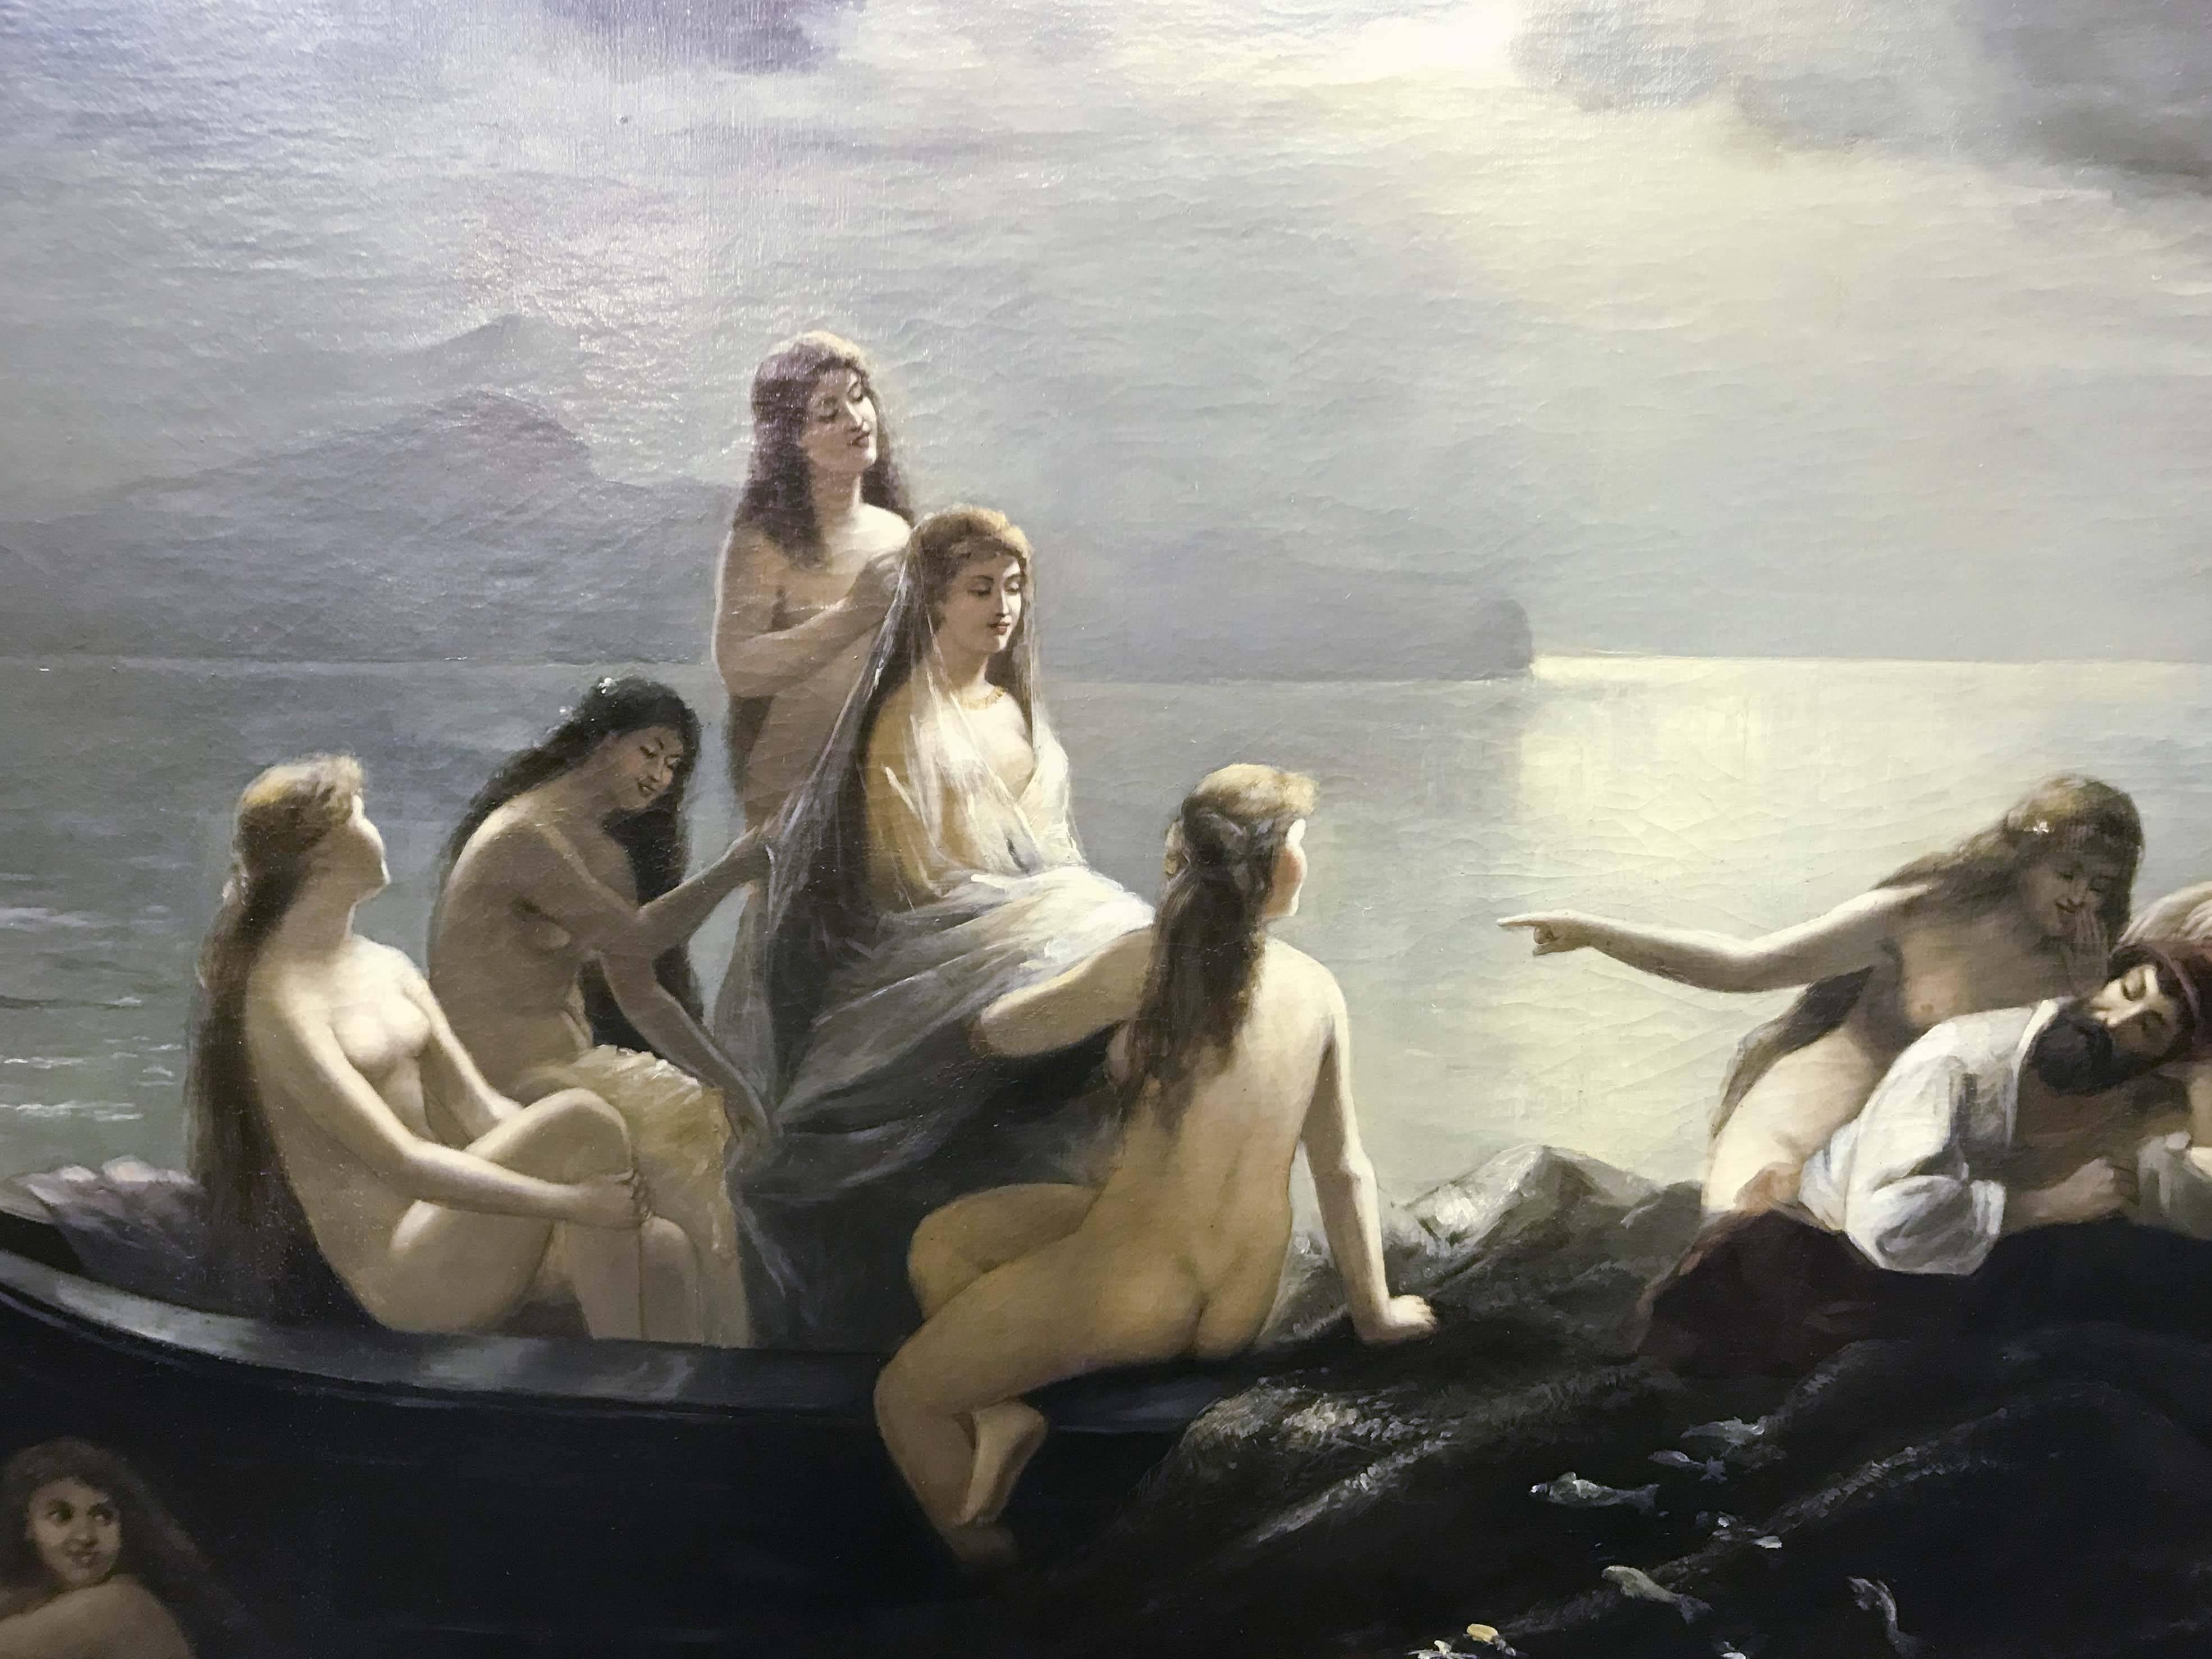 A beautiful painting of sirens at sea signed A. Dubois at lower right. Original condition, restored and re-stretched on new panels, see photos.